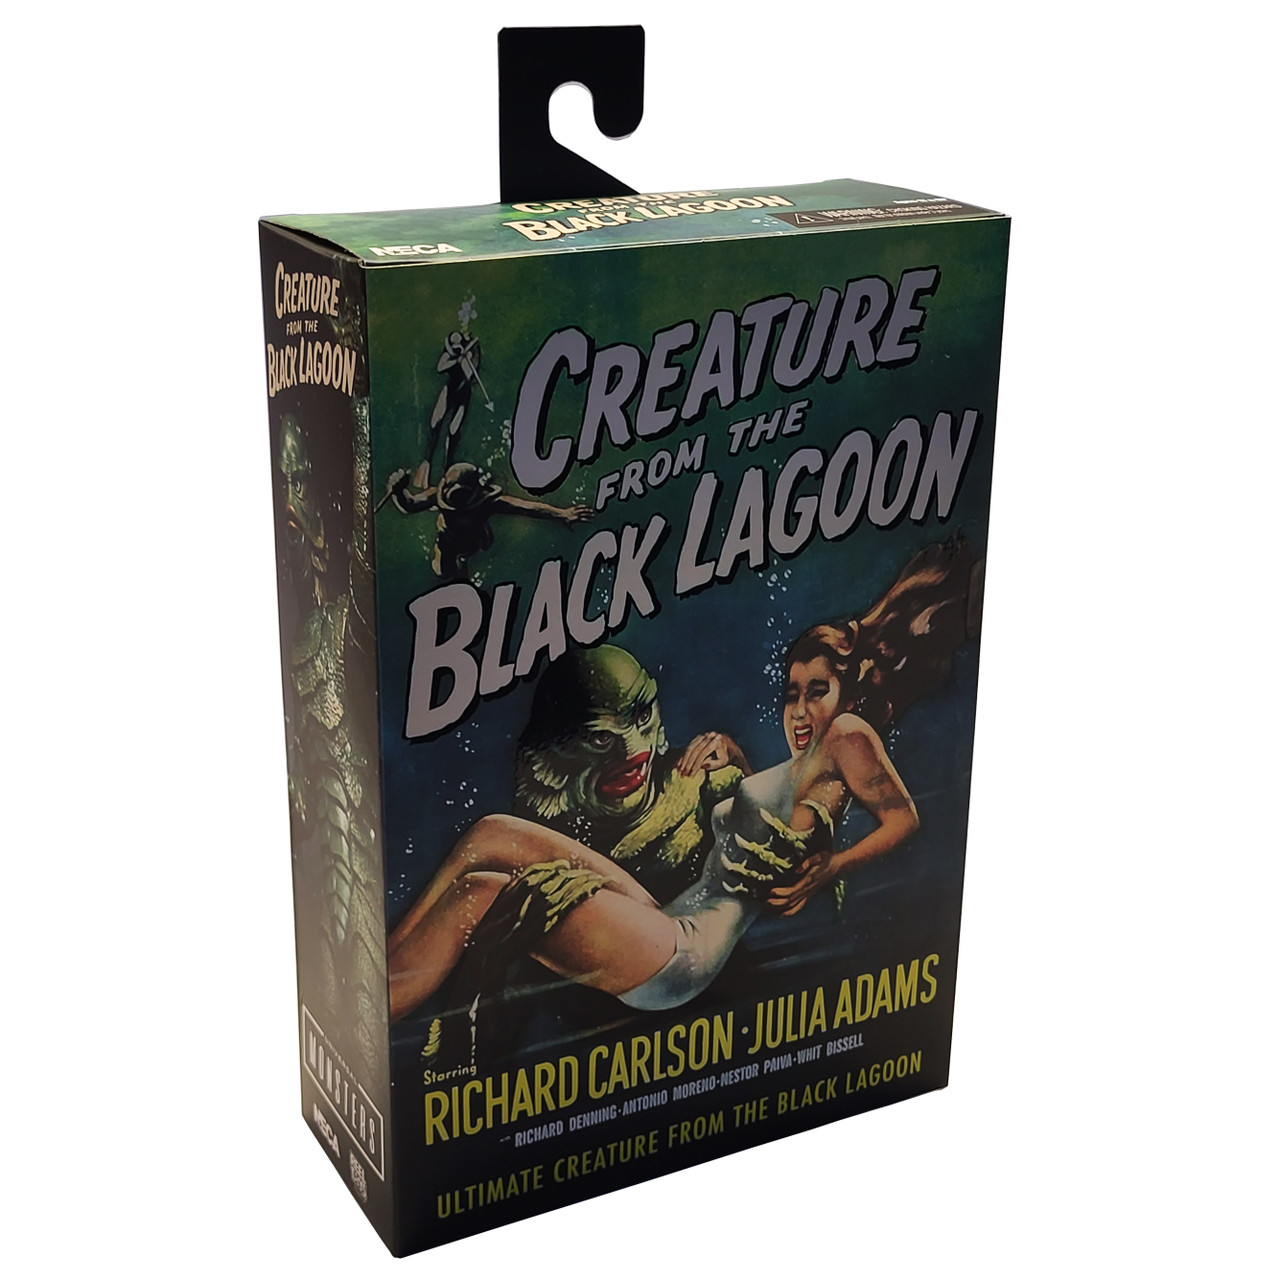 NECA 7" Ultimate 04822 Creature from the Black Lagoon (Color) Action Figure 1